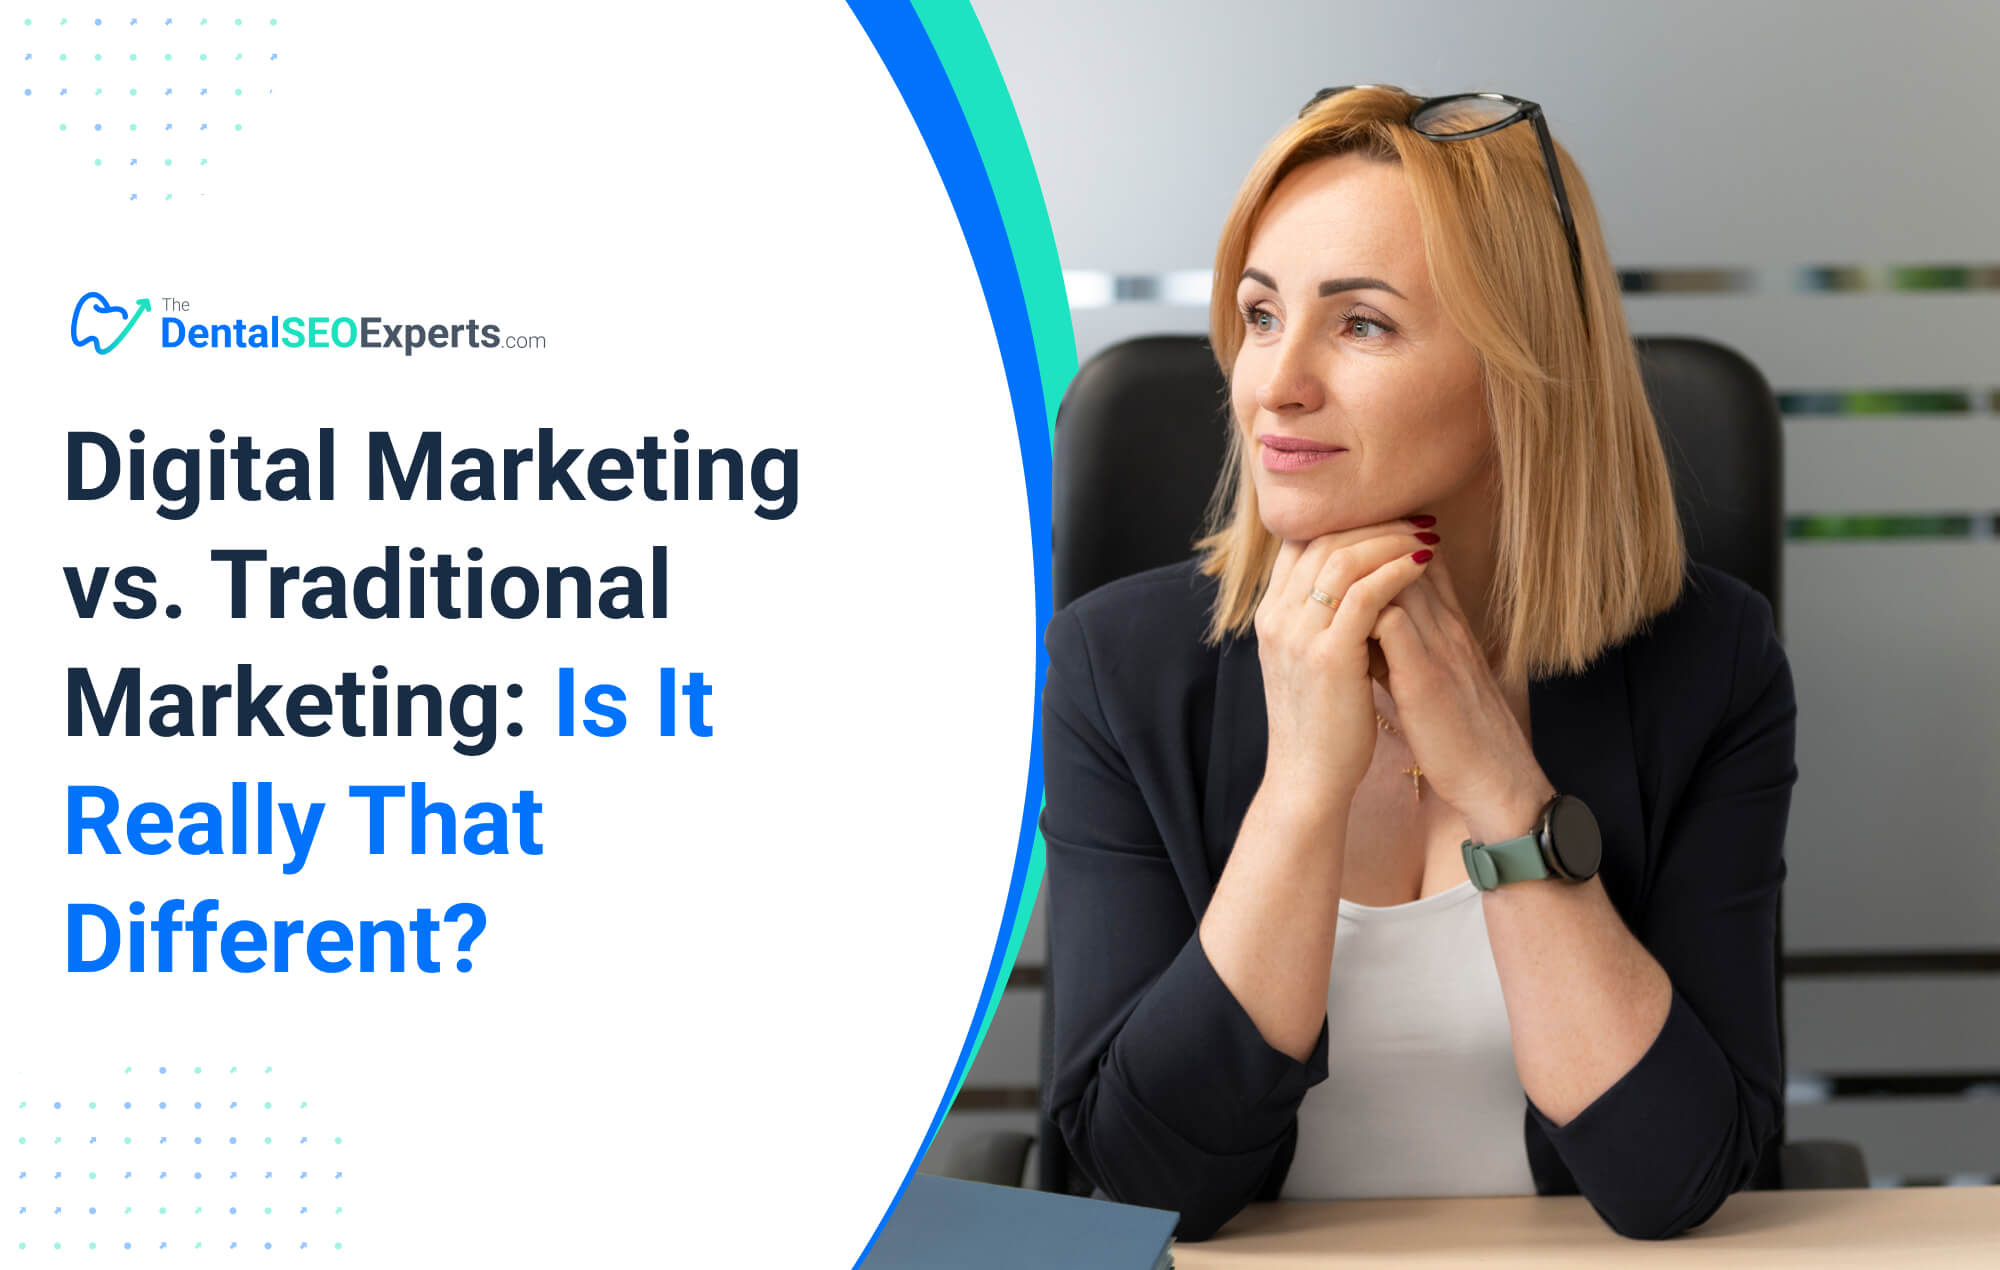 Digital Marketing vs. Traditional Marketing: Is It Really that Different?